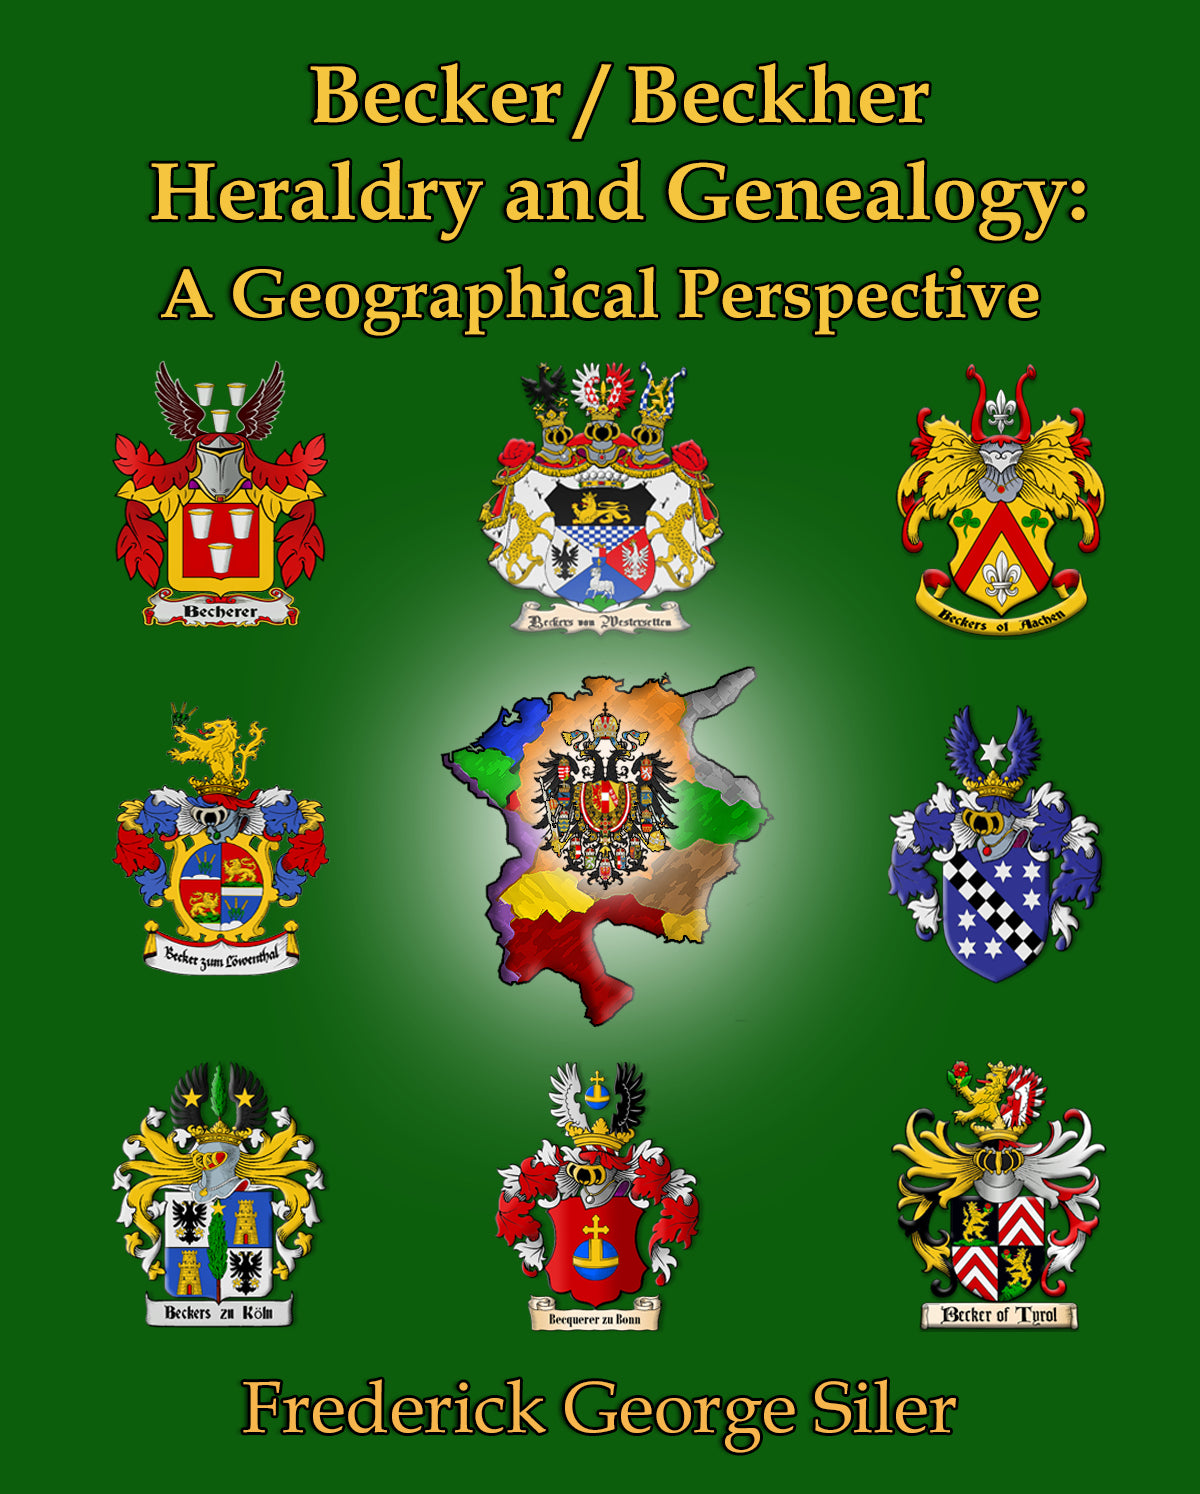 Becker/Beckher Heraldry and Genealogy: A Geographical Perspective